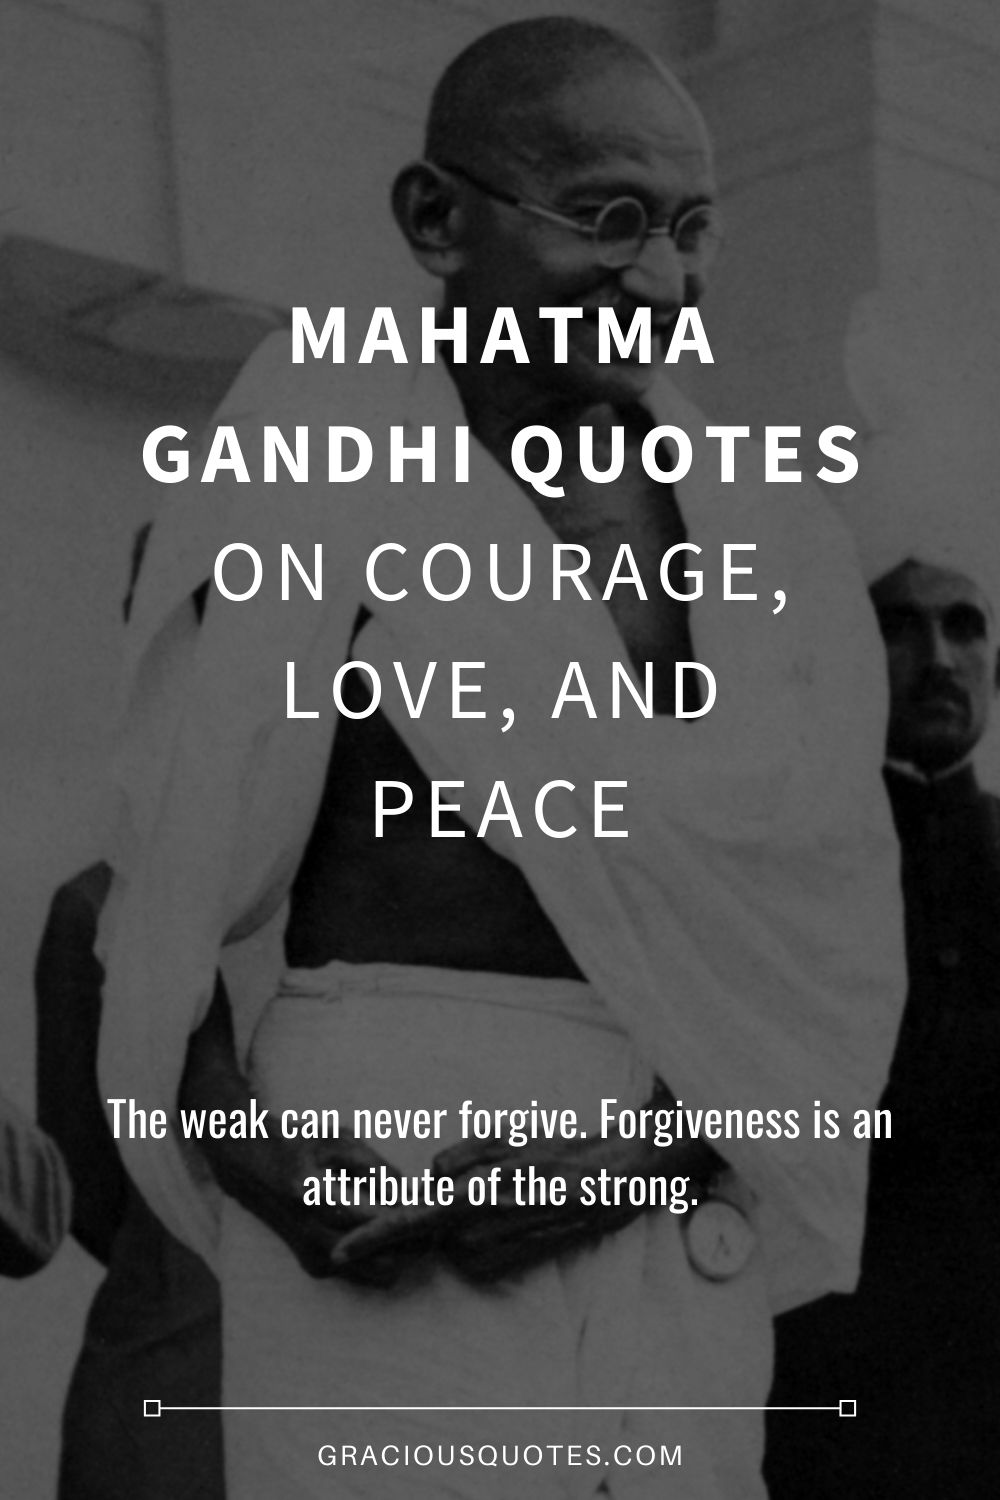 Mahatma-Gandhi-Quotes-on-Courage-Love-and-Peace-Gracious-Quotes